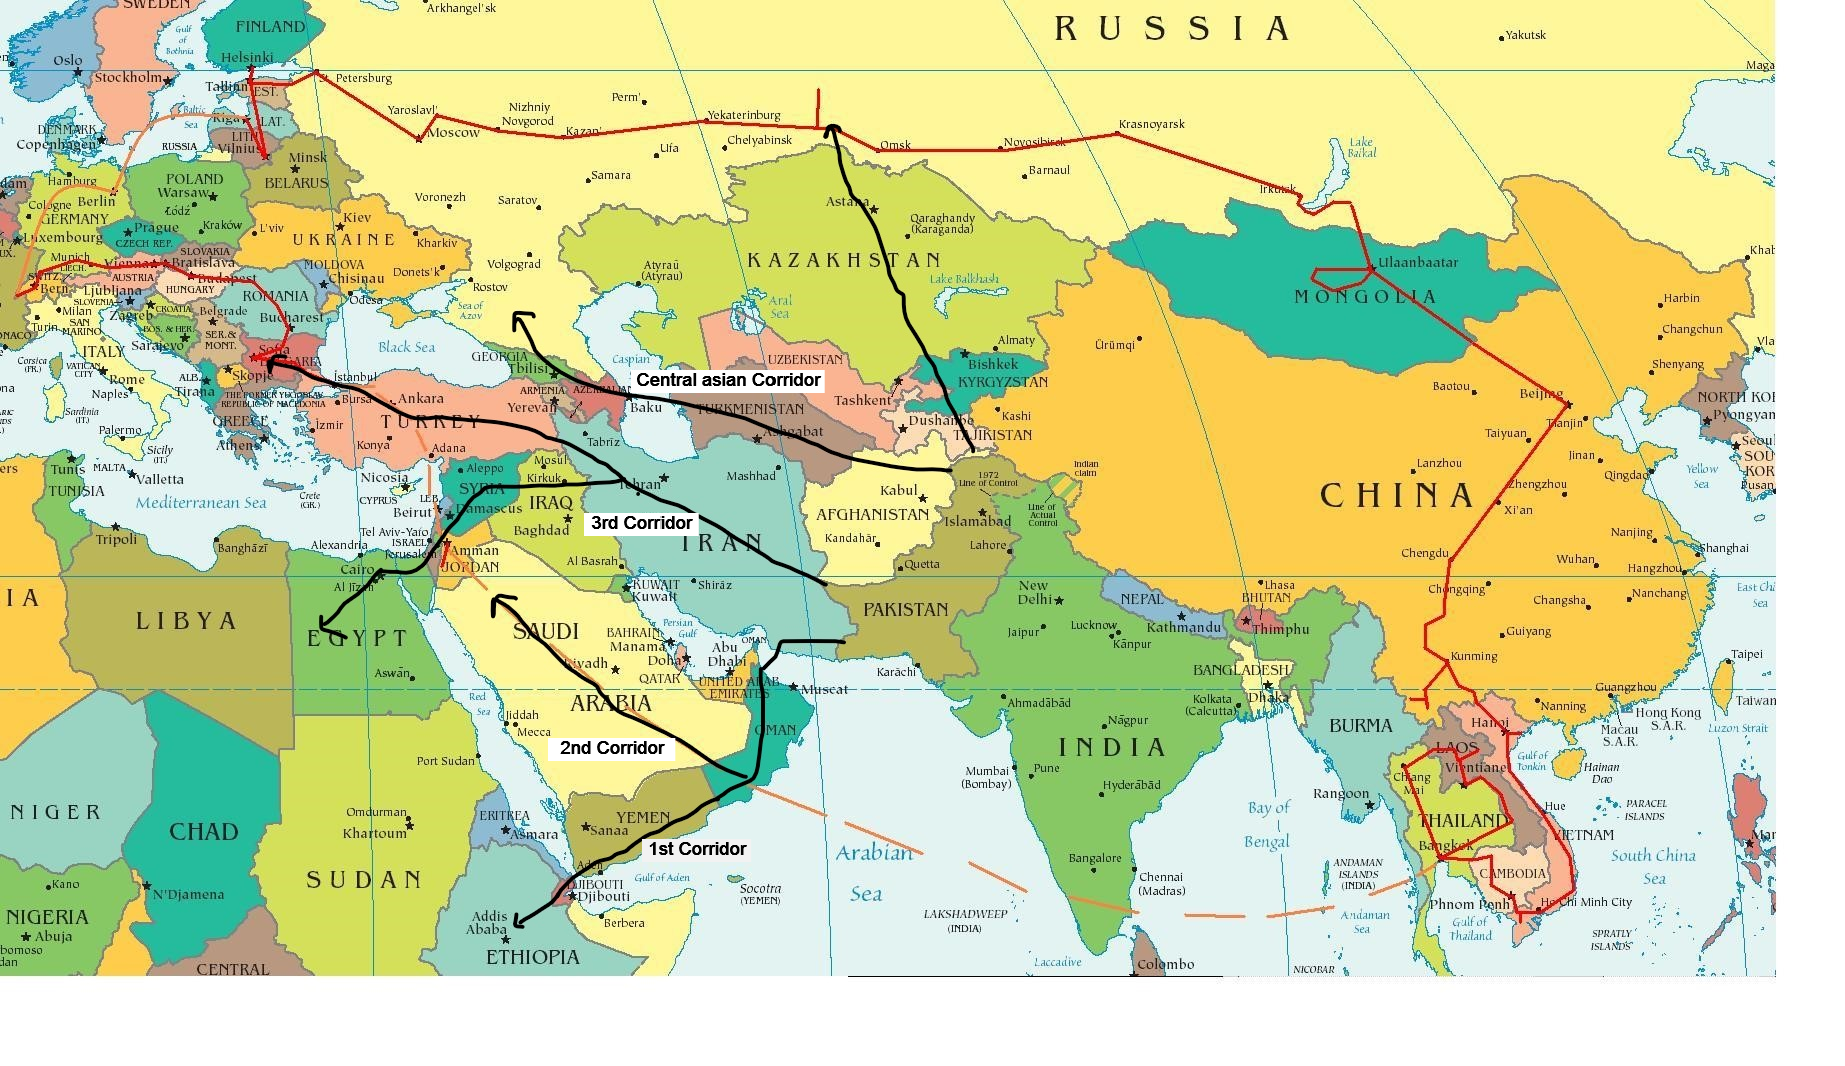 InkedPartial-Europe-Middle-East-Asia-Partial-Russia-Partial-Africa-Map_LI.png